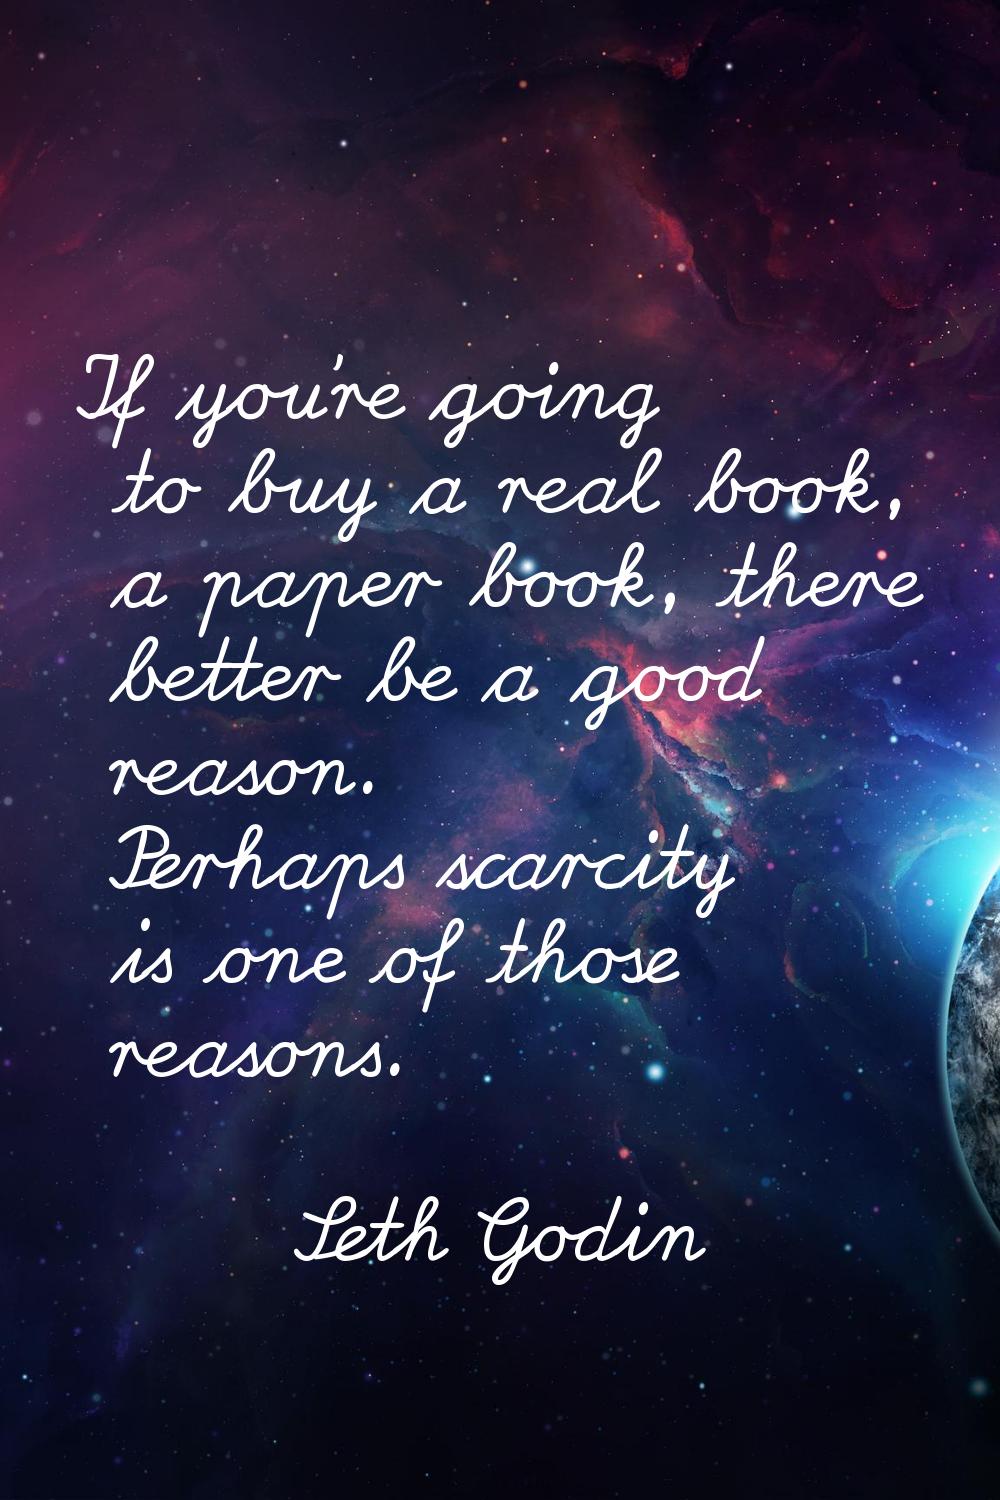 If you're going to buy a real book, a paper book, there better be a good reason. Perhaps scarcity i